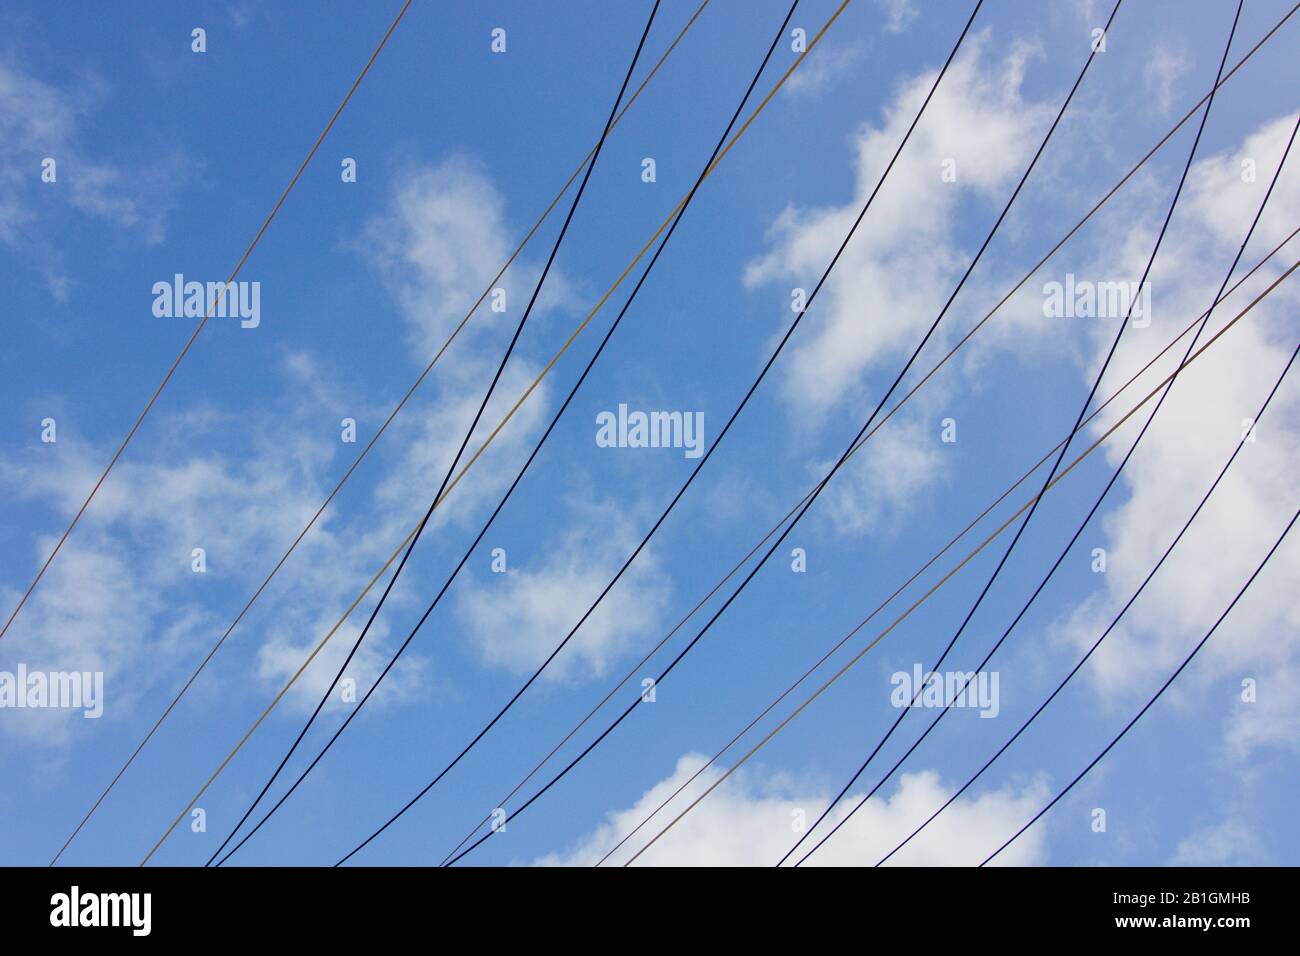 Electric power cables against blue cloudy sky with copy space Stock Photo